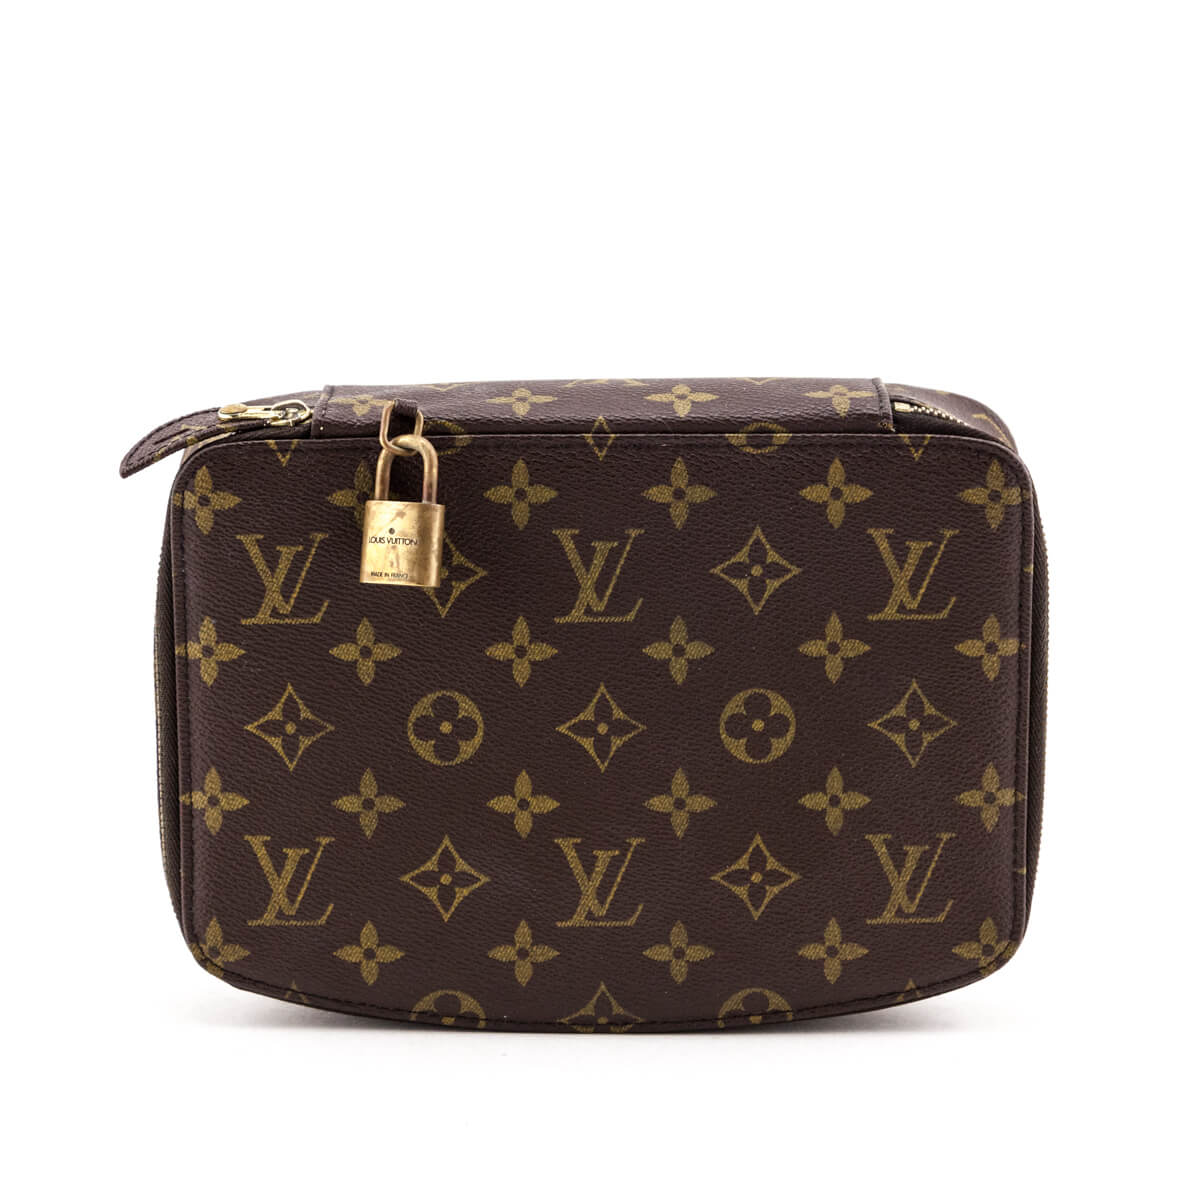 Authentic Pre-Owned Louis Vuitton Bags, Jewelry & Accessories